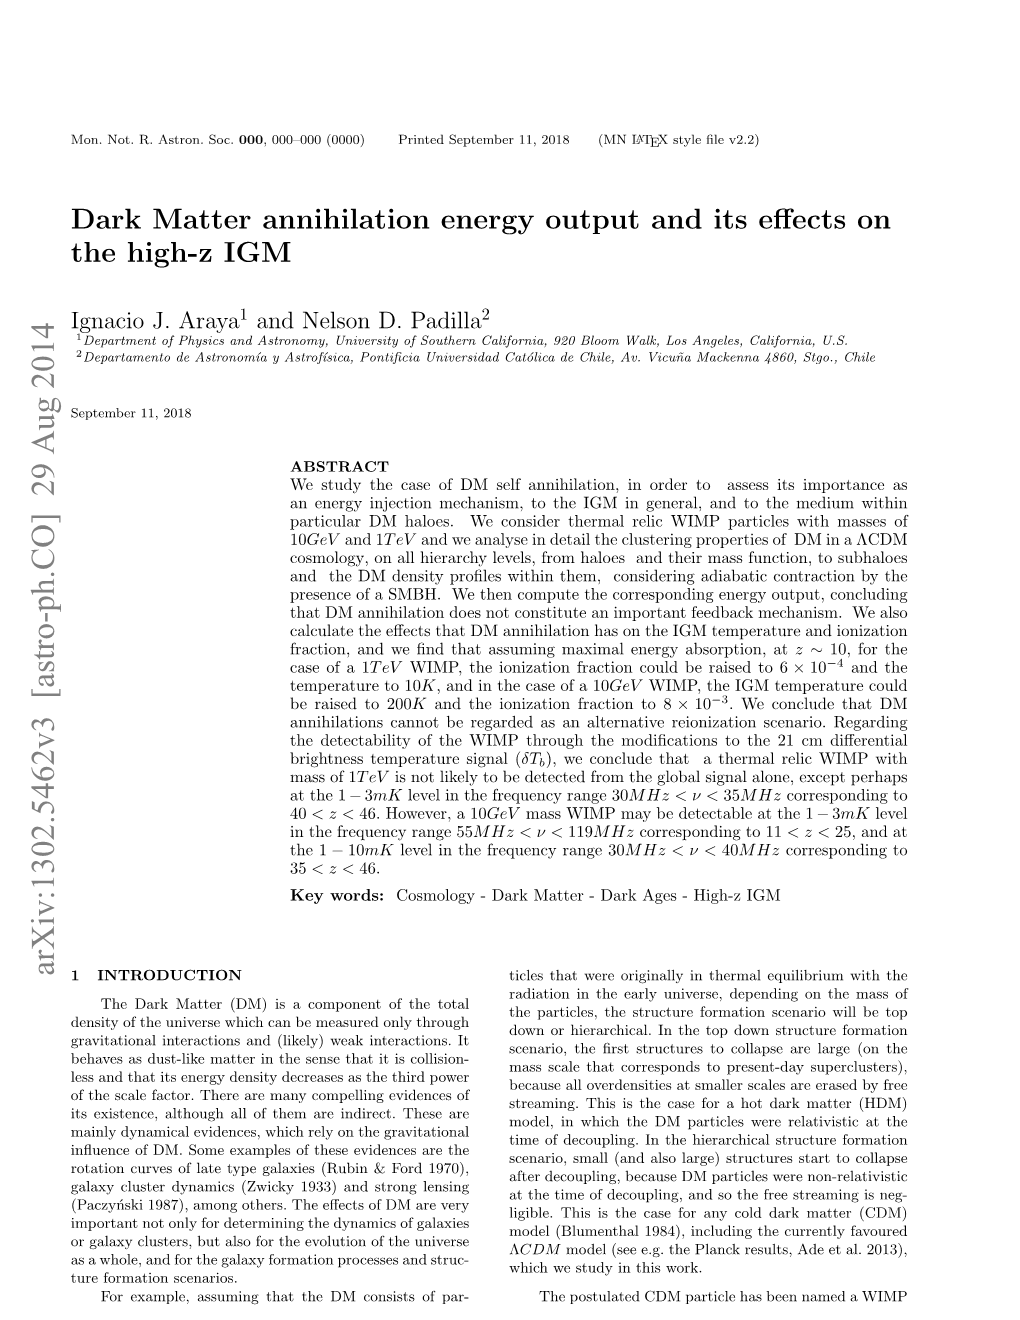 Dark Matter Annihilation Energy Output and Its Effects on the High-Z